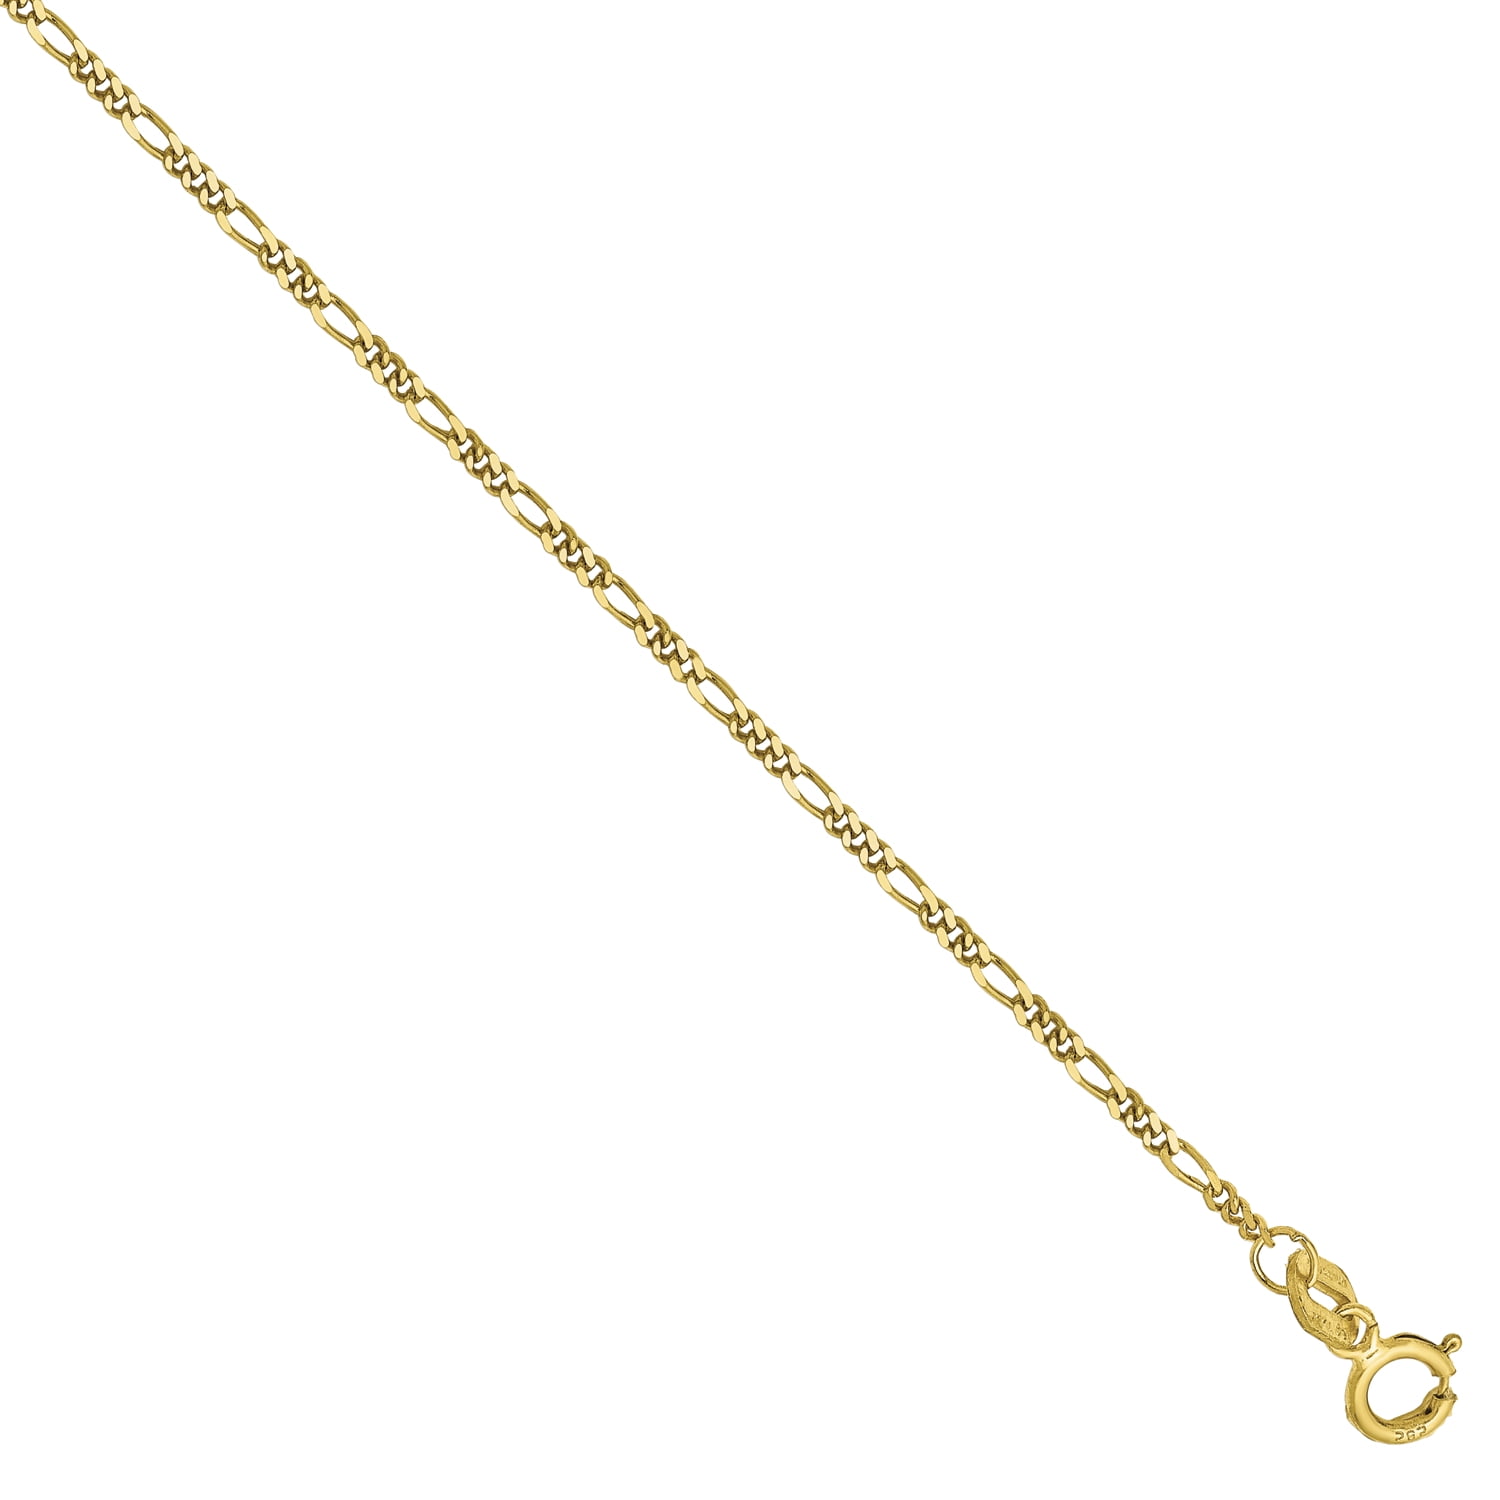 10K Solid Tri-color Gold Valentino Chain Necklaces Diamond cut 2.8mm Nickel Free 16-24 inches long 